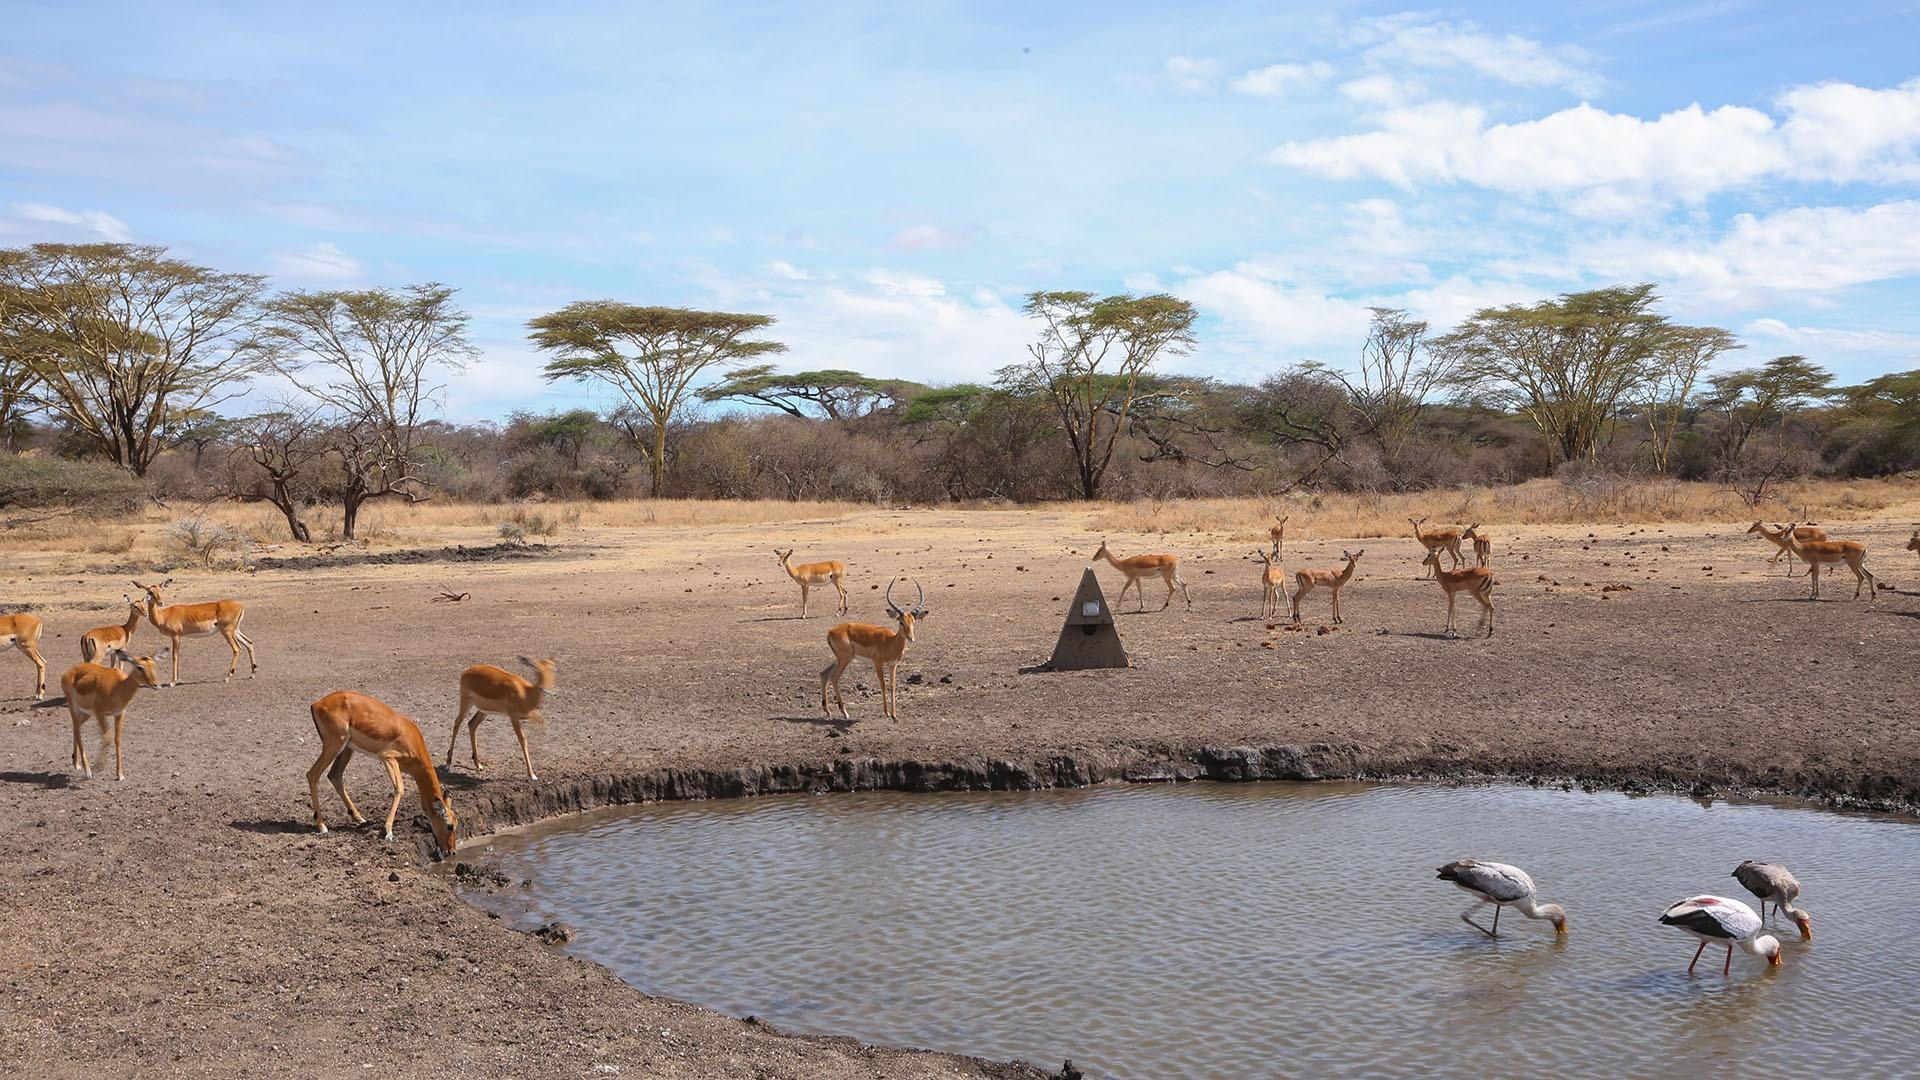 During the dry season, the waterhole provides life-saving water for a whole community.